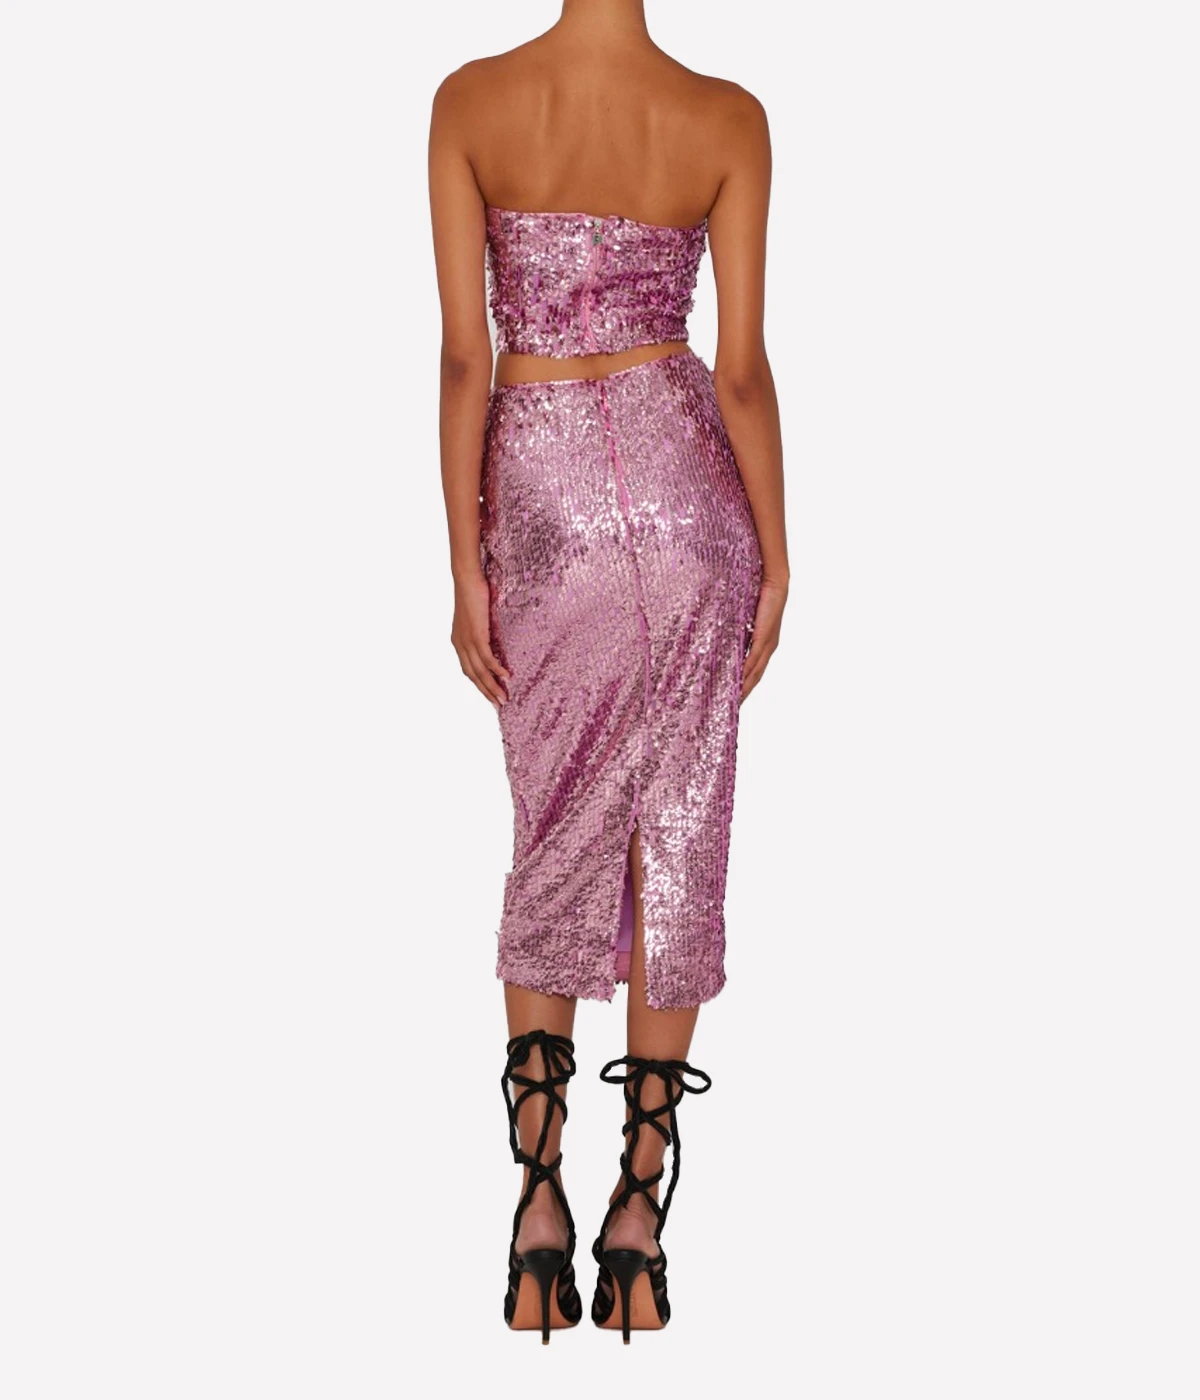 Sequin Pencil Skirt in Fuchsia Pink